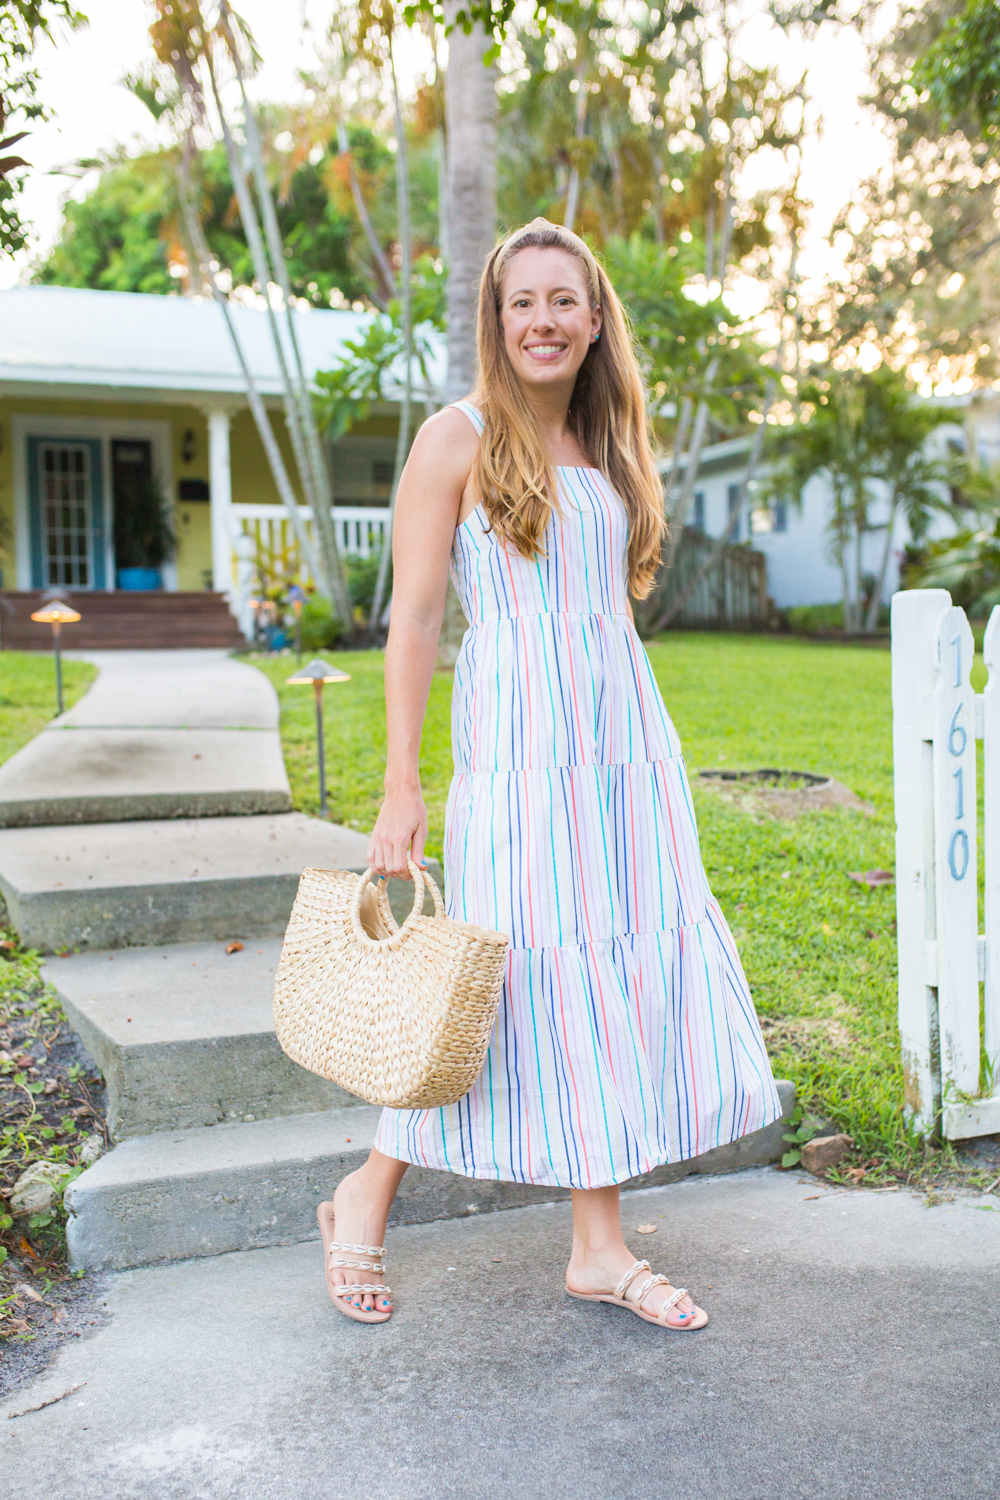 J.Crew Factory Striped Maxi Dress / How to Style a Maxi Dress in Warm-Weather / Summer Maxi Dress / Summer Dress Outfit / Preppy Outfit / Preppy Style Summer - Sunshine Style, A Florida Fashion and Lifestyle Blog